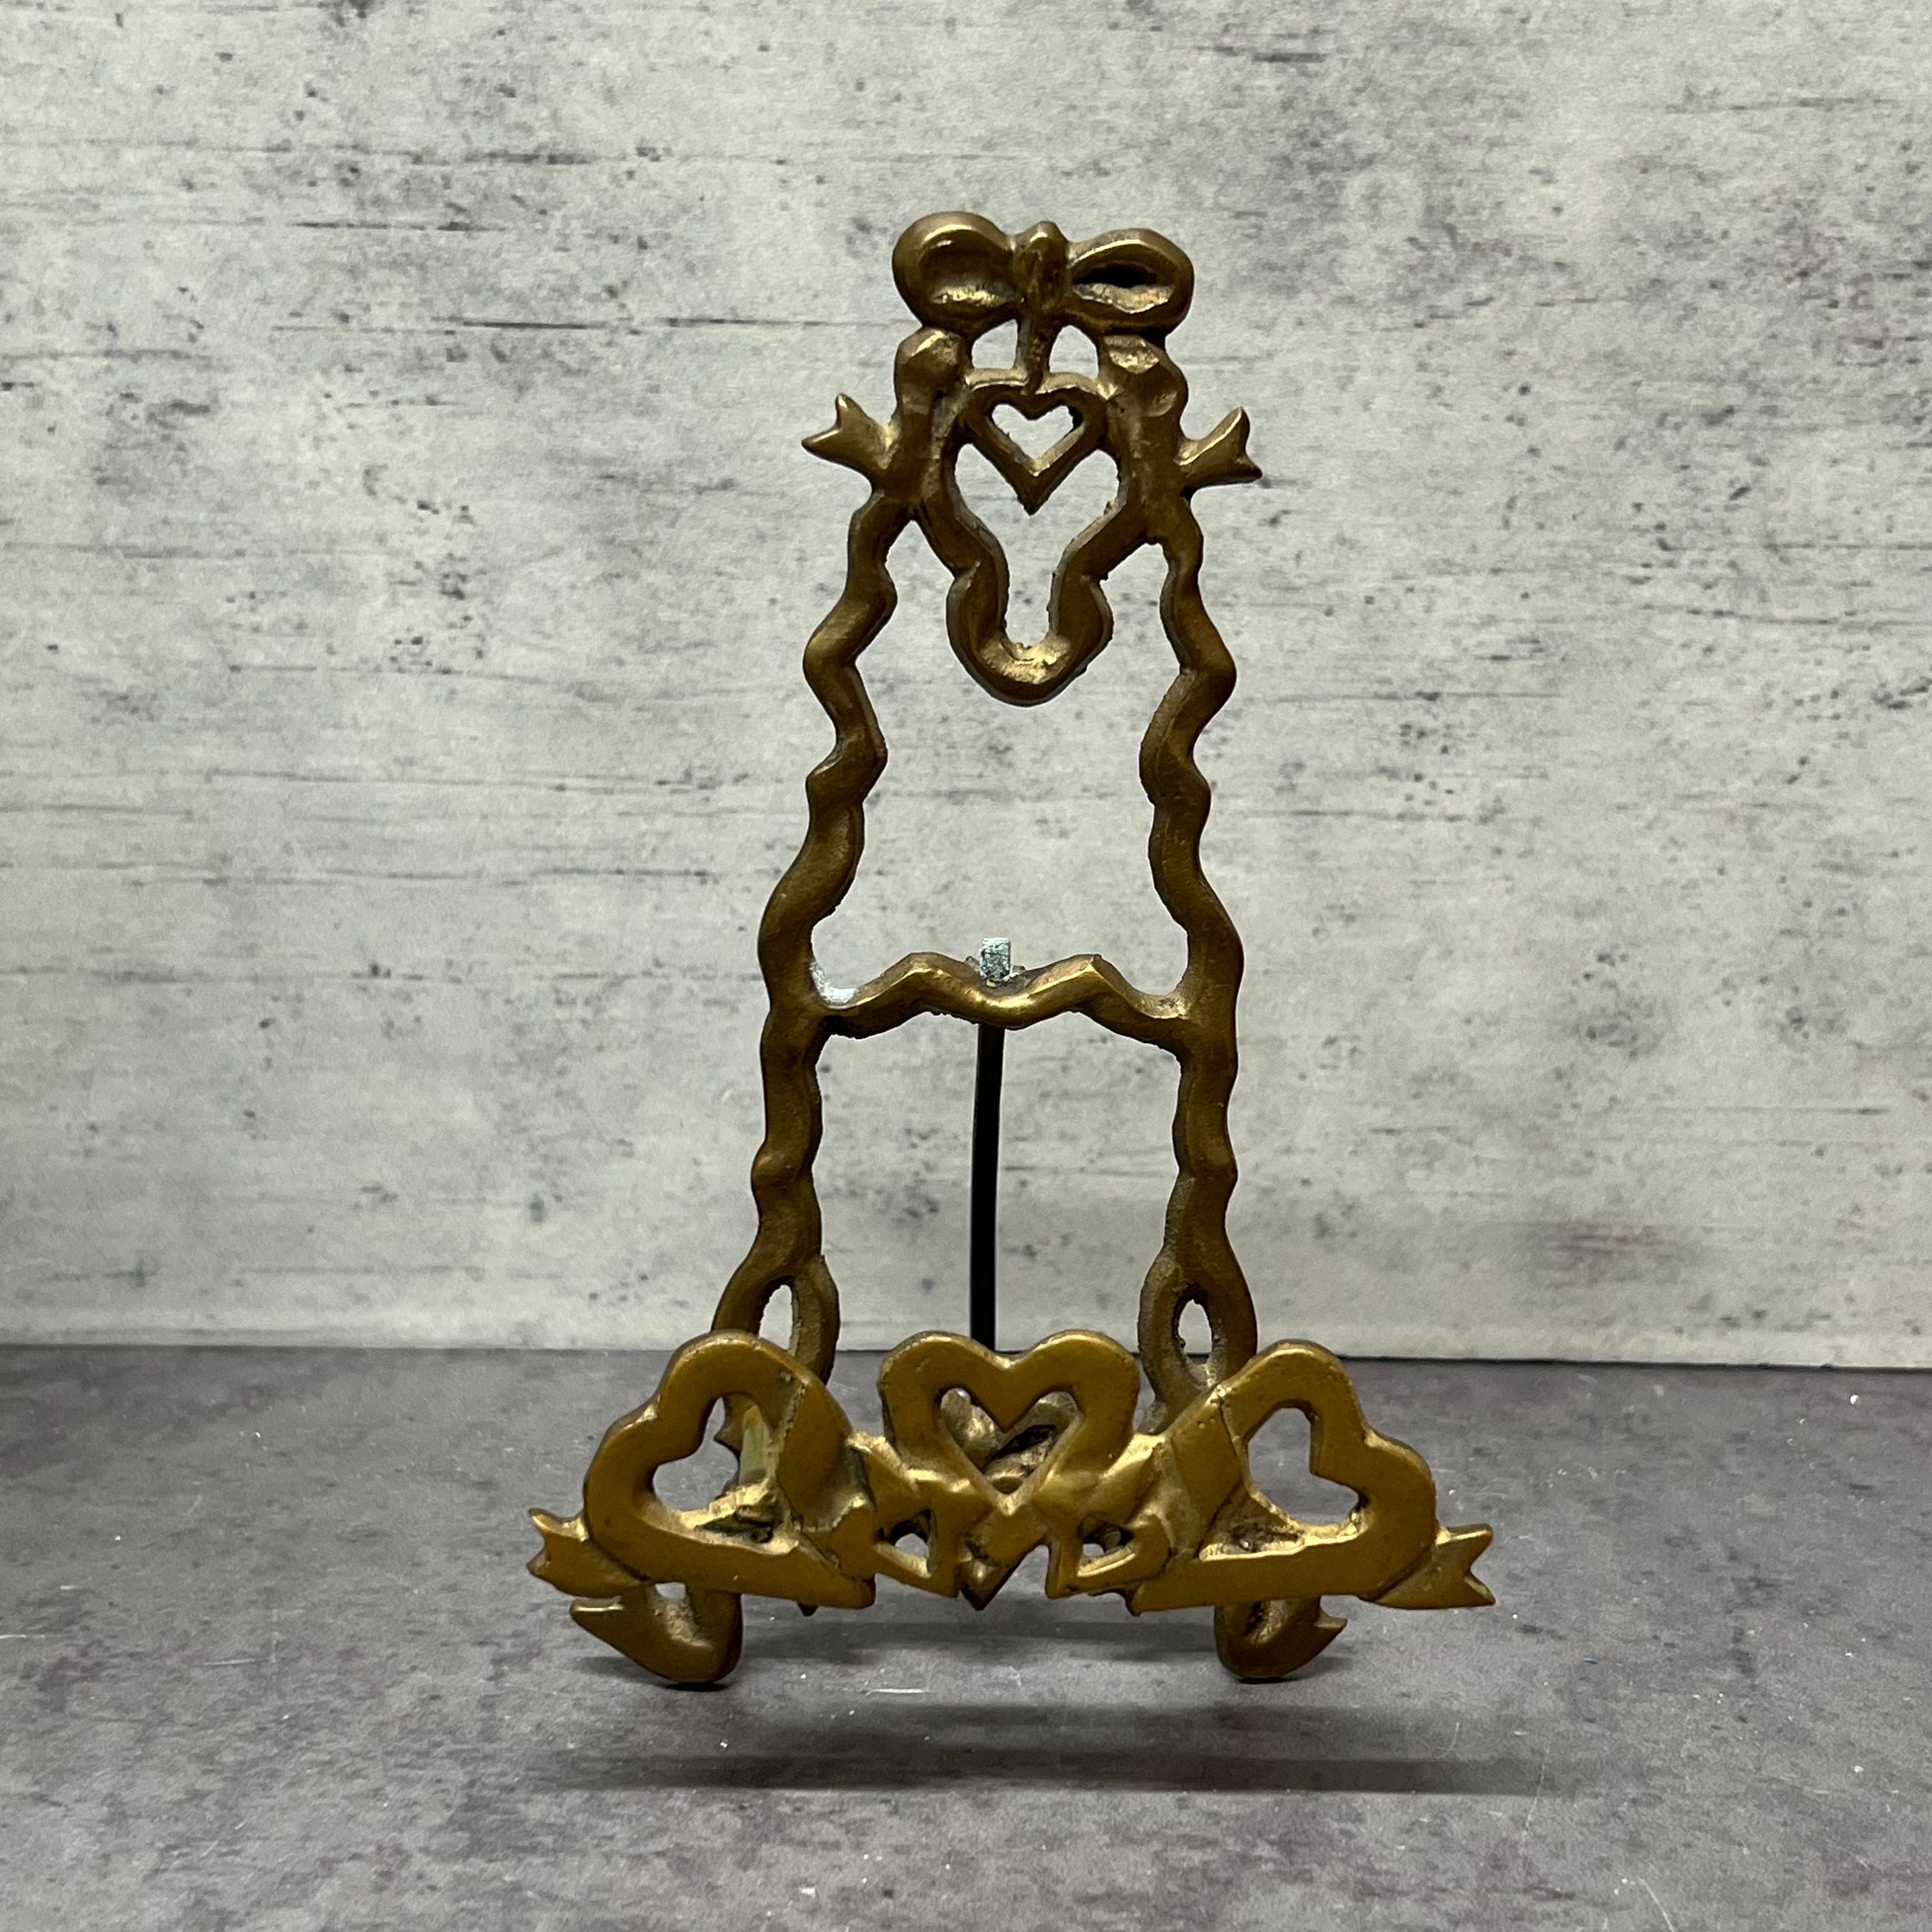 Vintage Brass ornate picture easel stand 6.5 Made in Korea Corona decor Co.